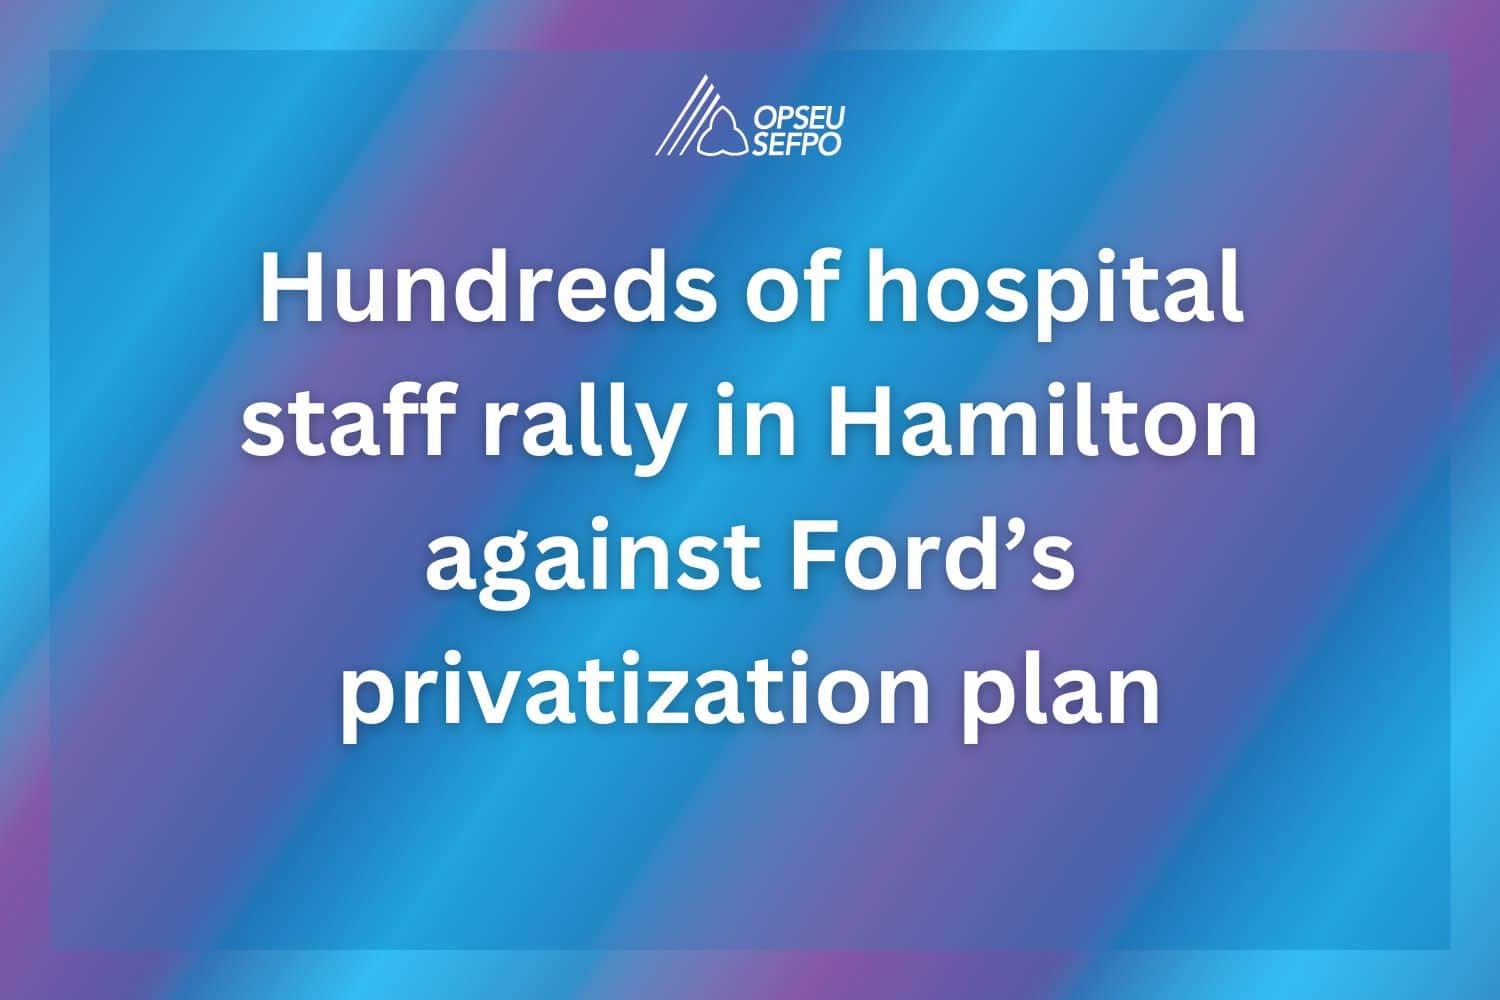 Hundreds of hospital staff rally in Hamilton against Ford’s privatization plan